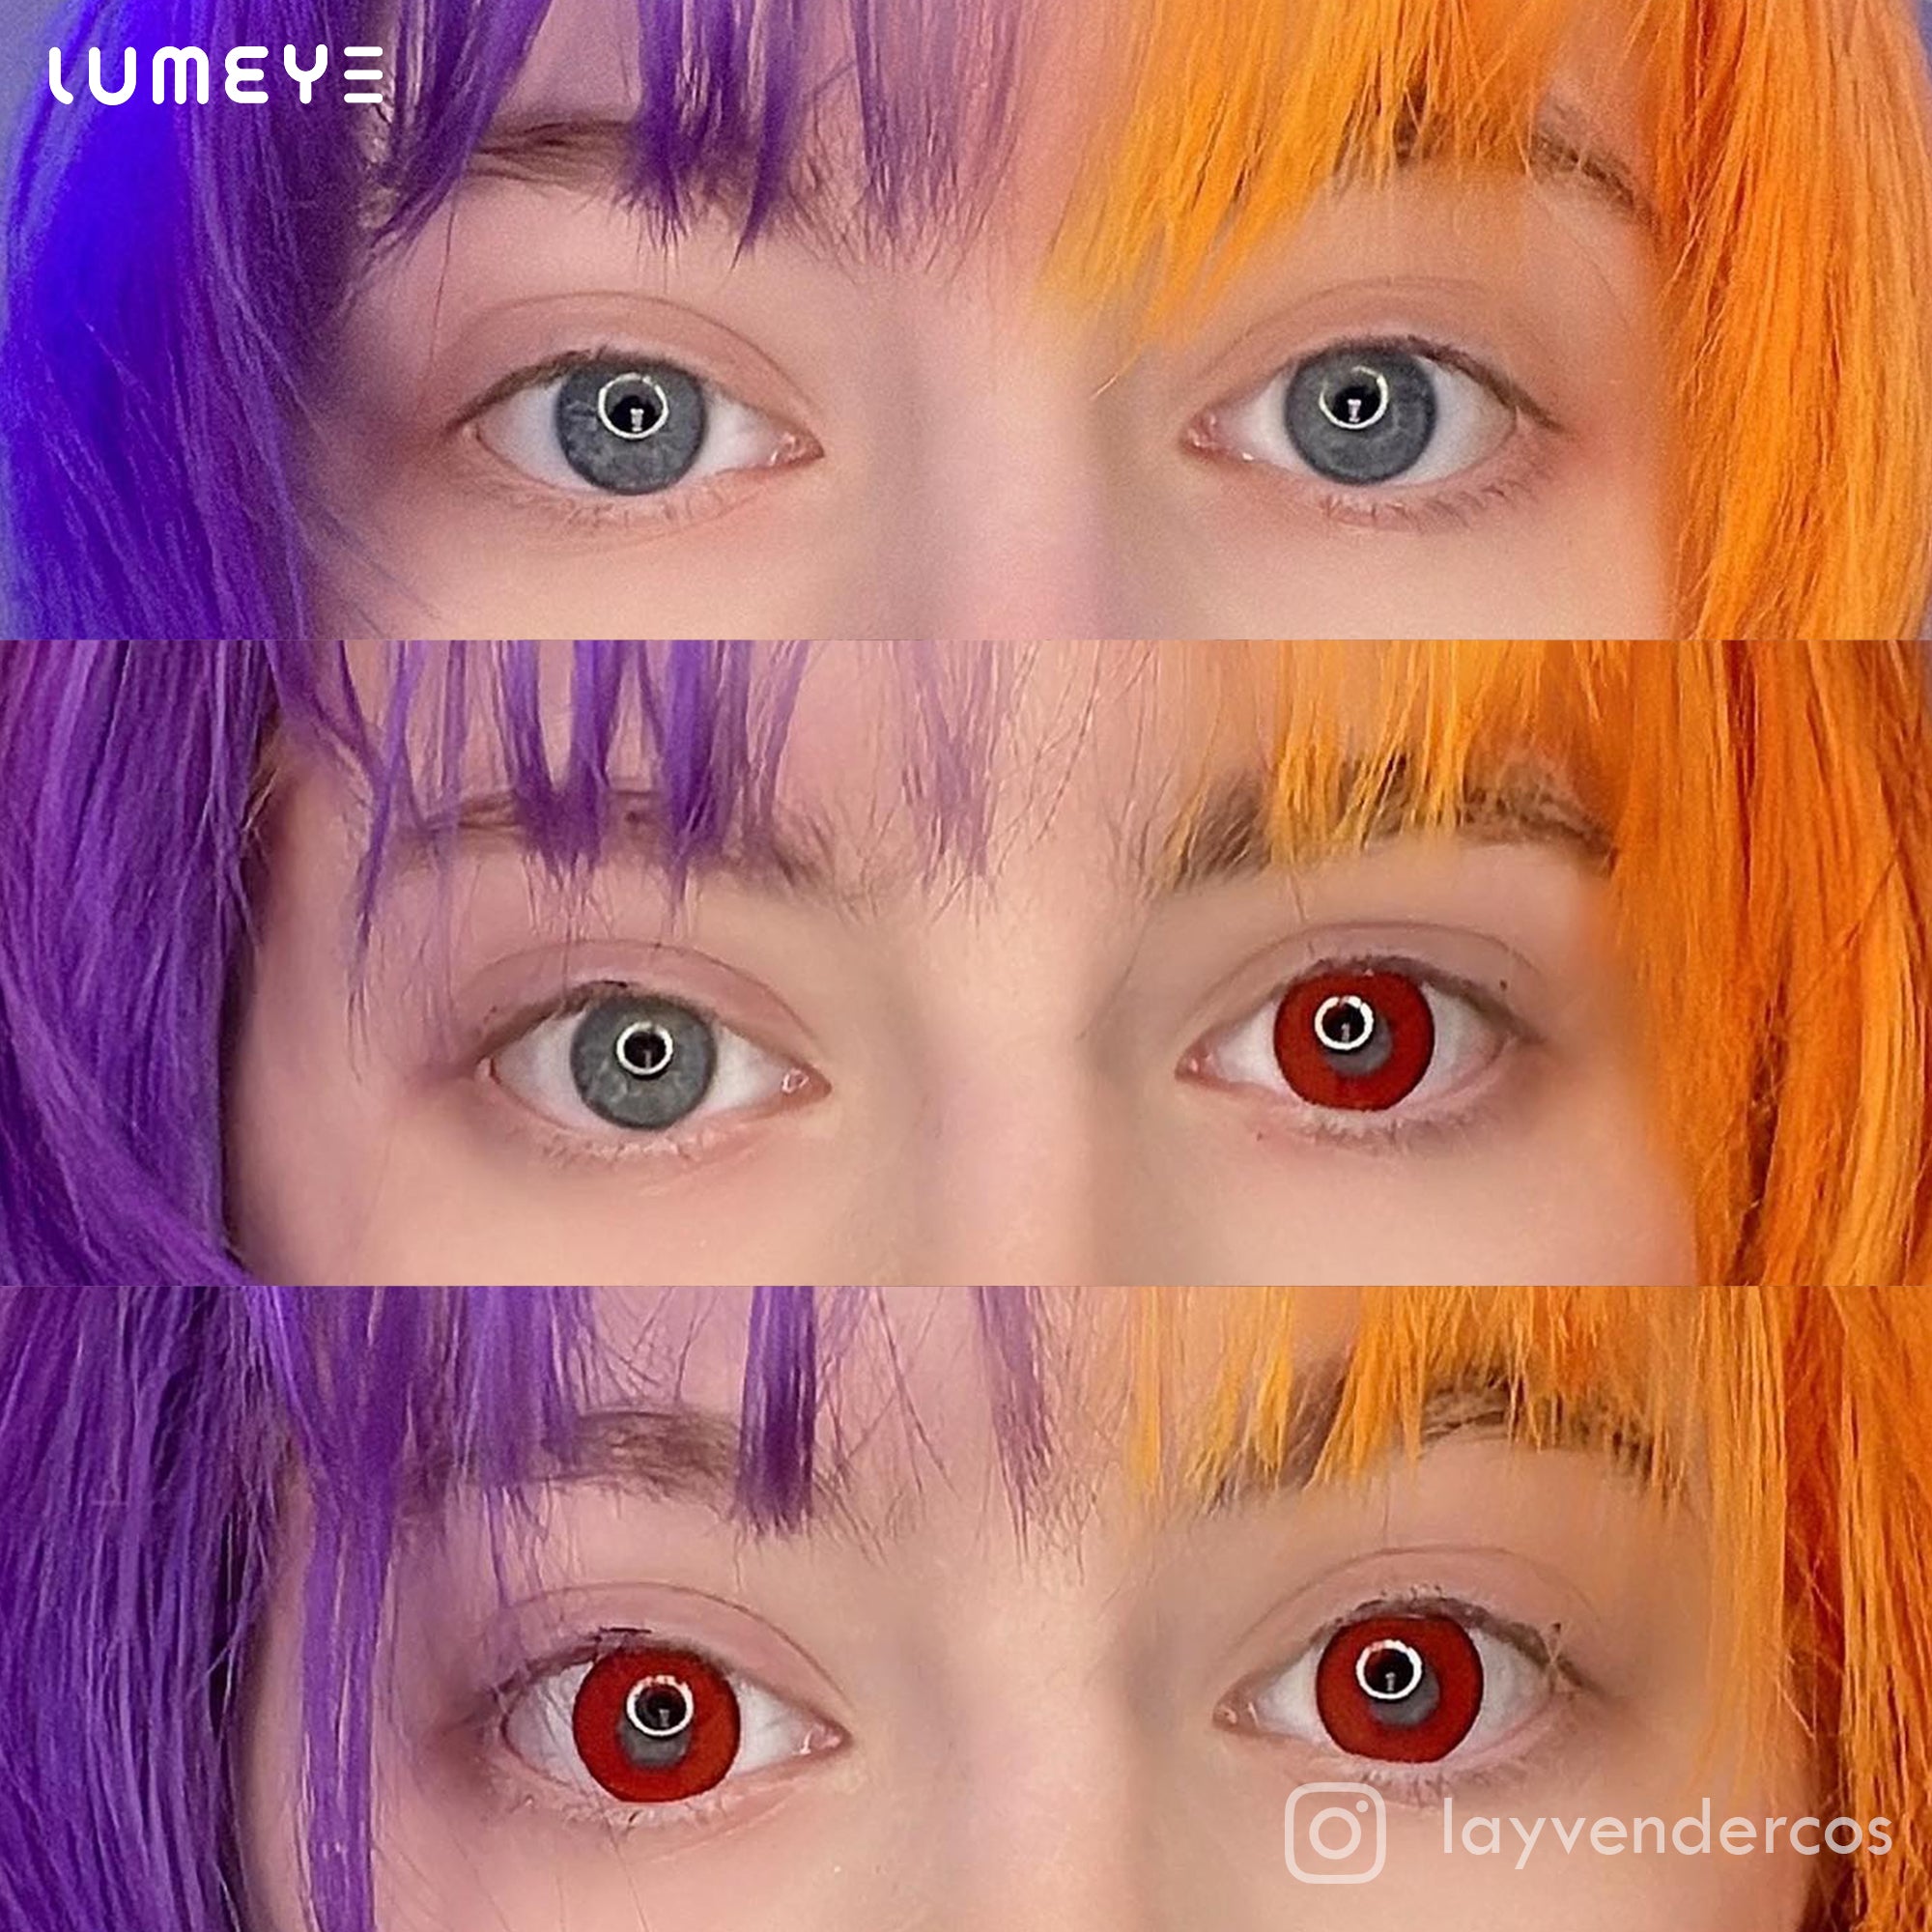 Best COLORED CONTACTS - LUMEYE Demon Red Colored Contact Lenses - LUMEYE